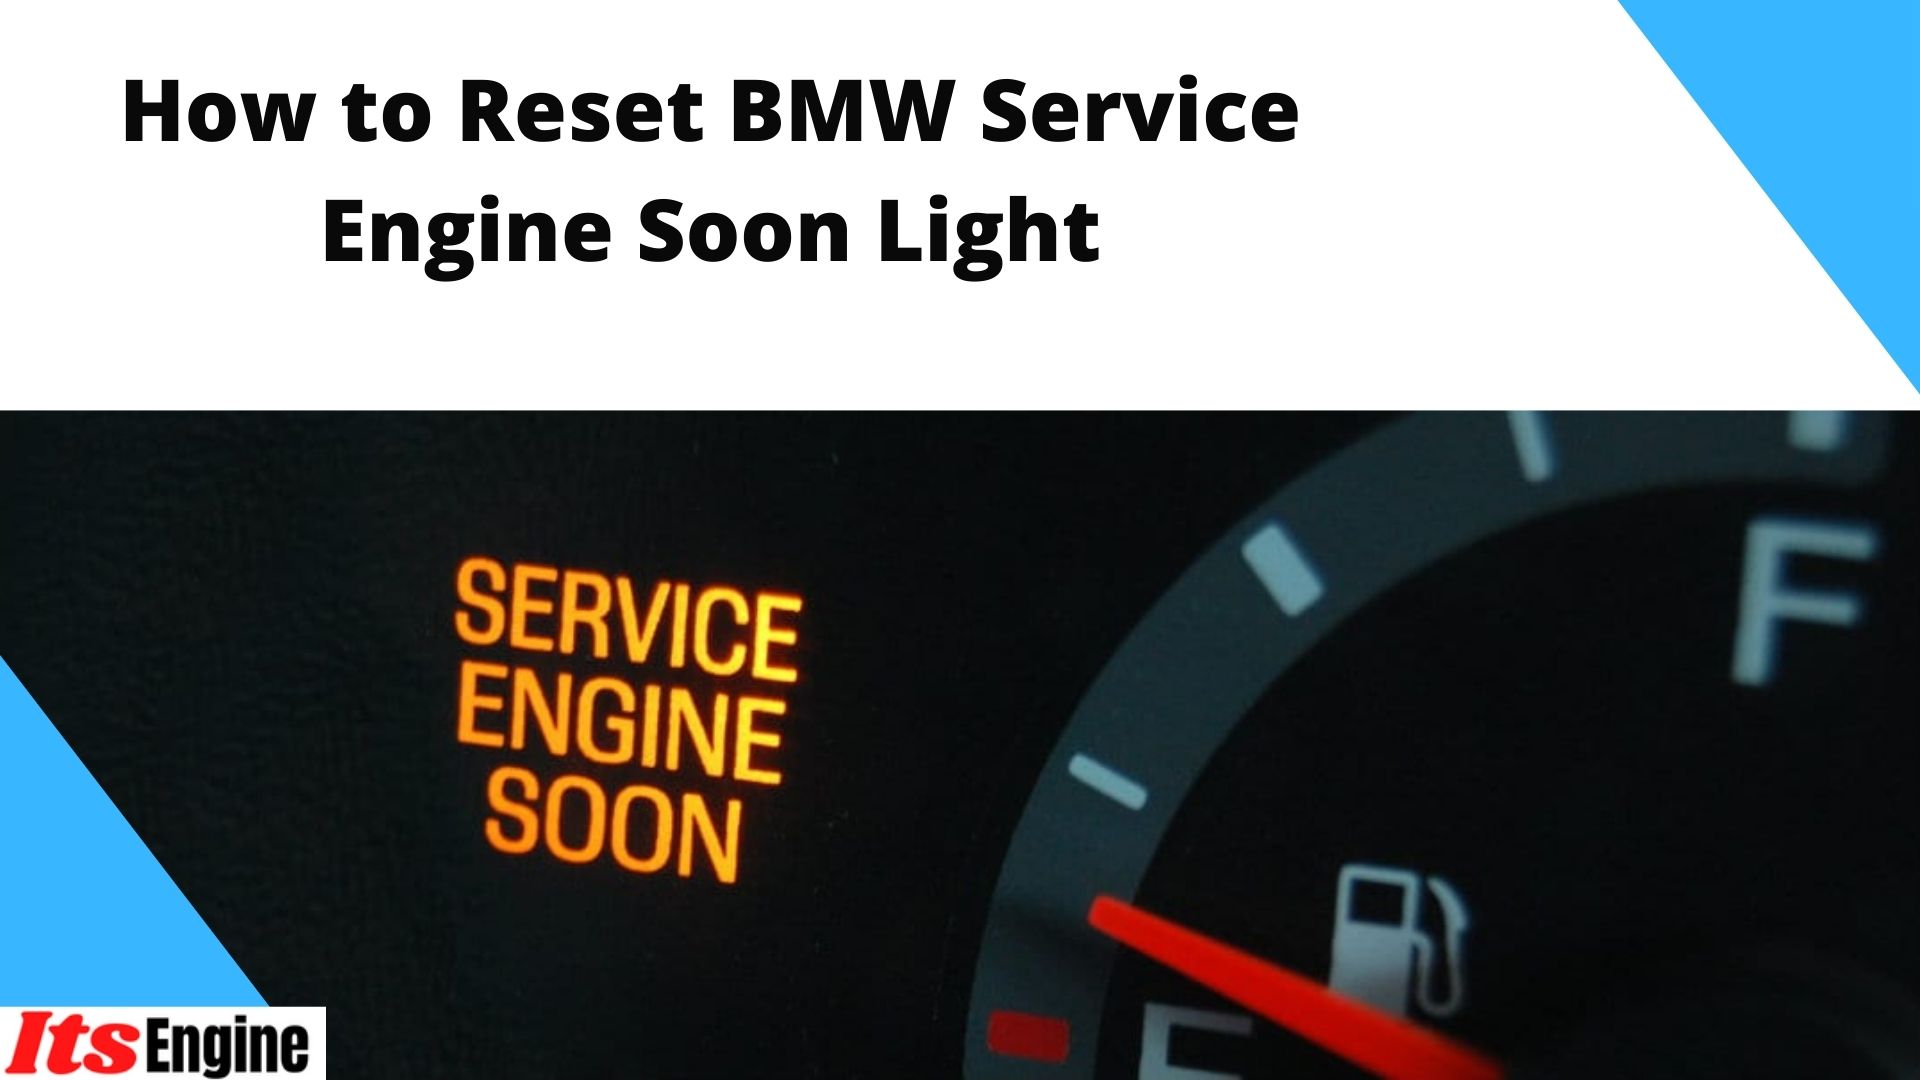 How to Reset BMW Service Engine Soon Light